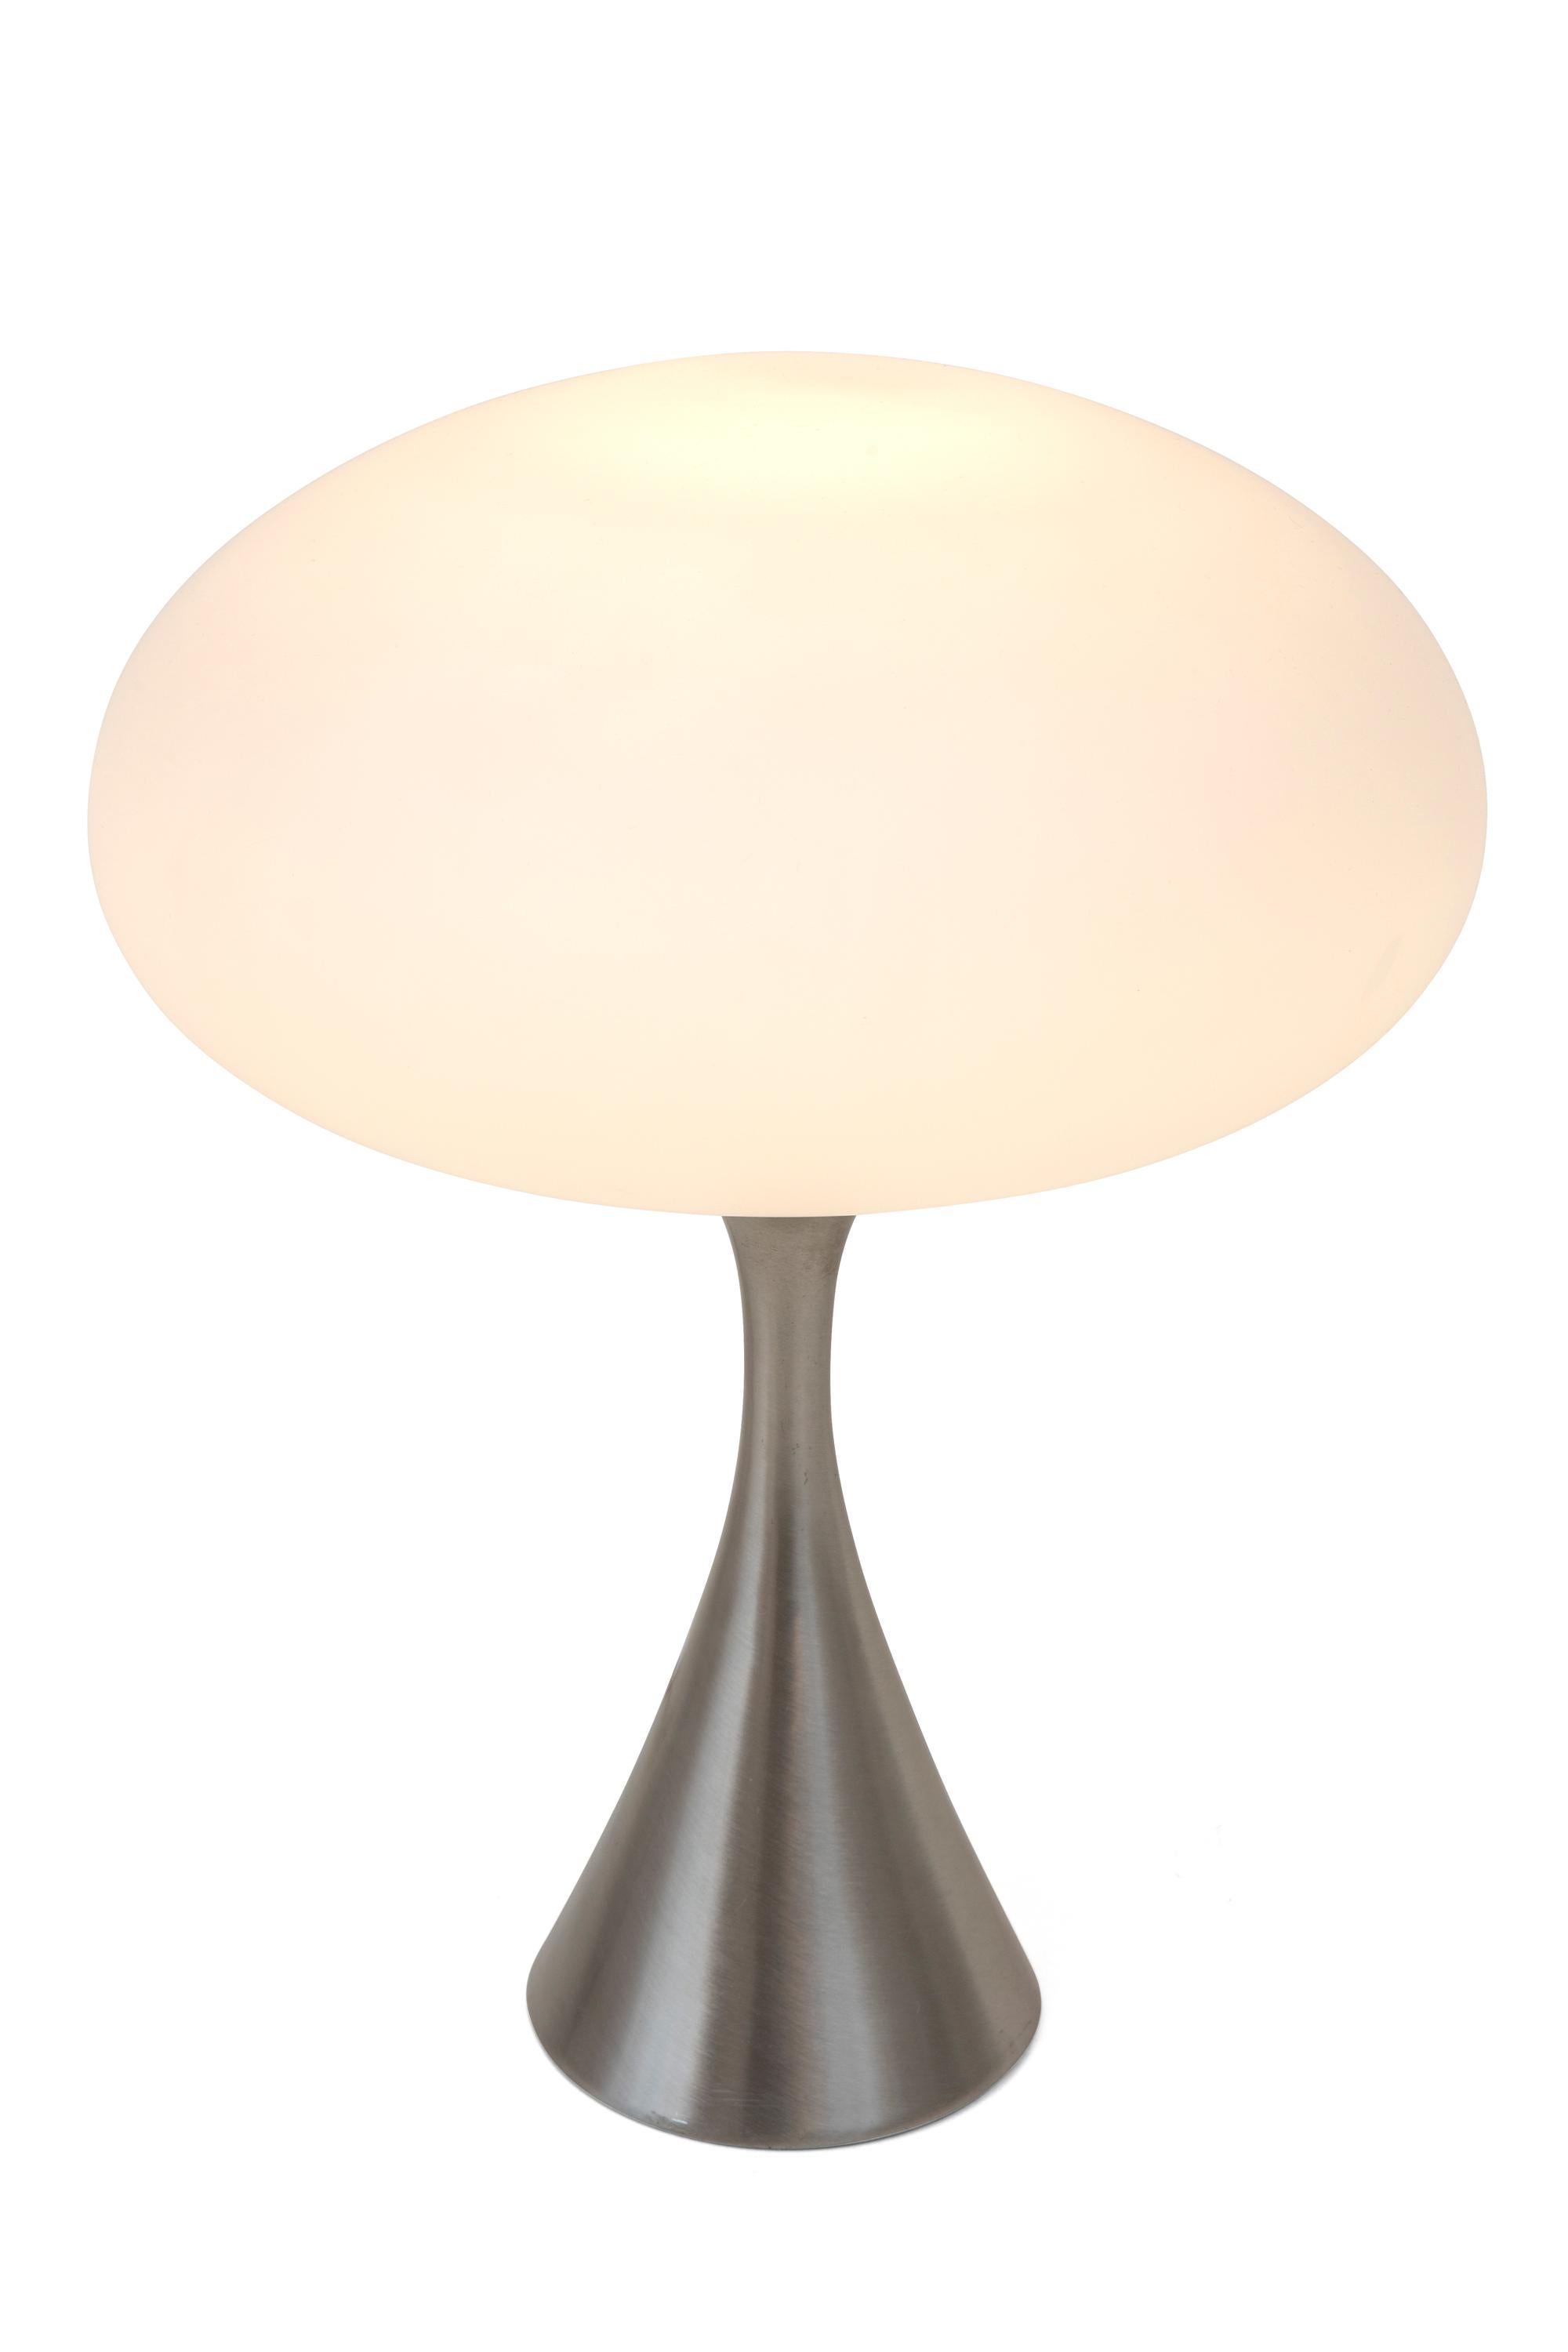 It doesn't get any more iconic than the Laurel Mushroom lamps. This particular lamp has the added appeal of the brushed steel base.